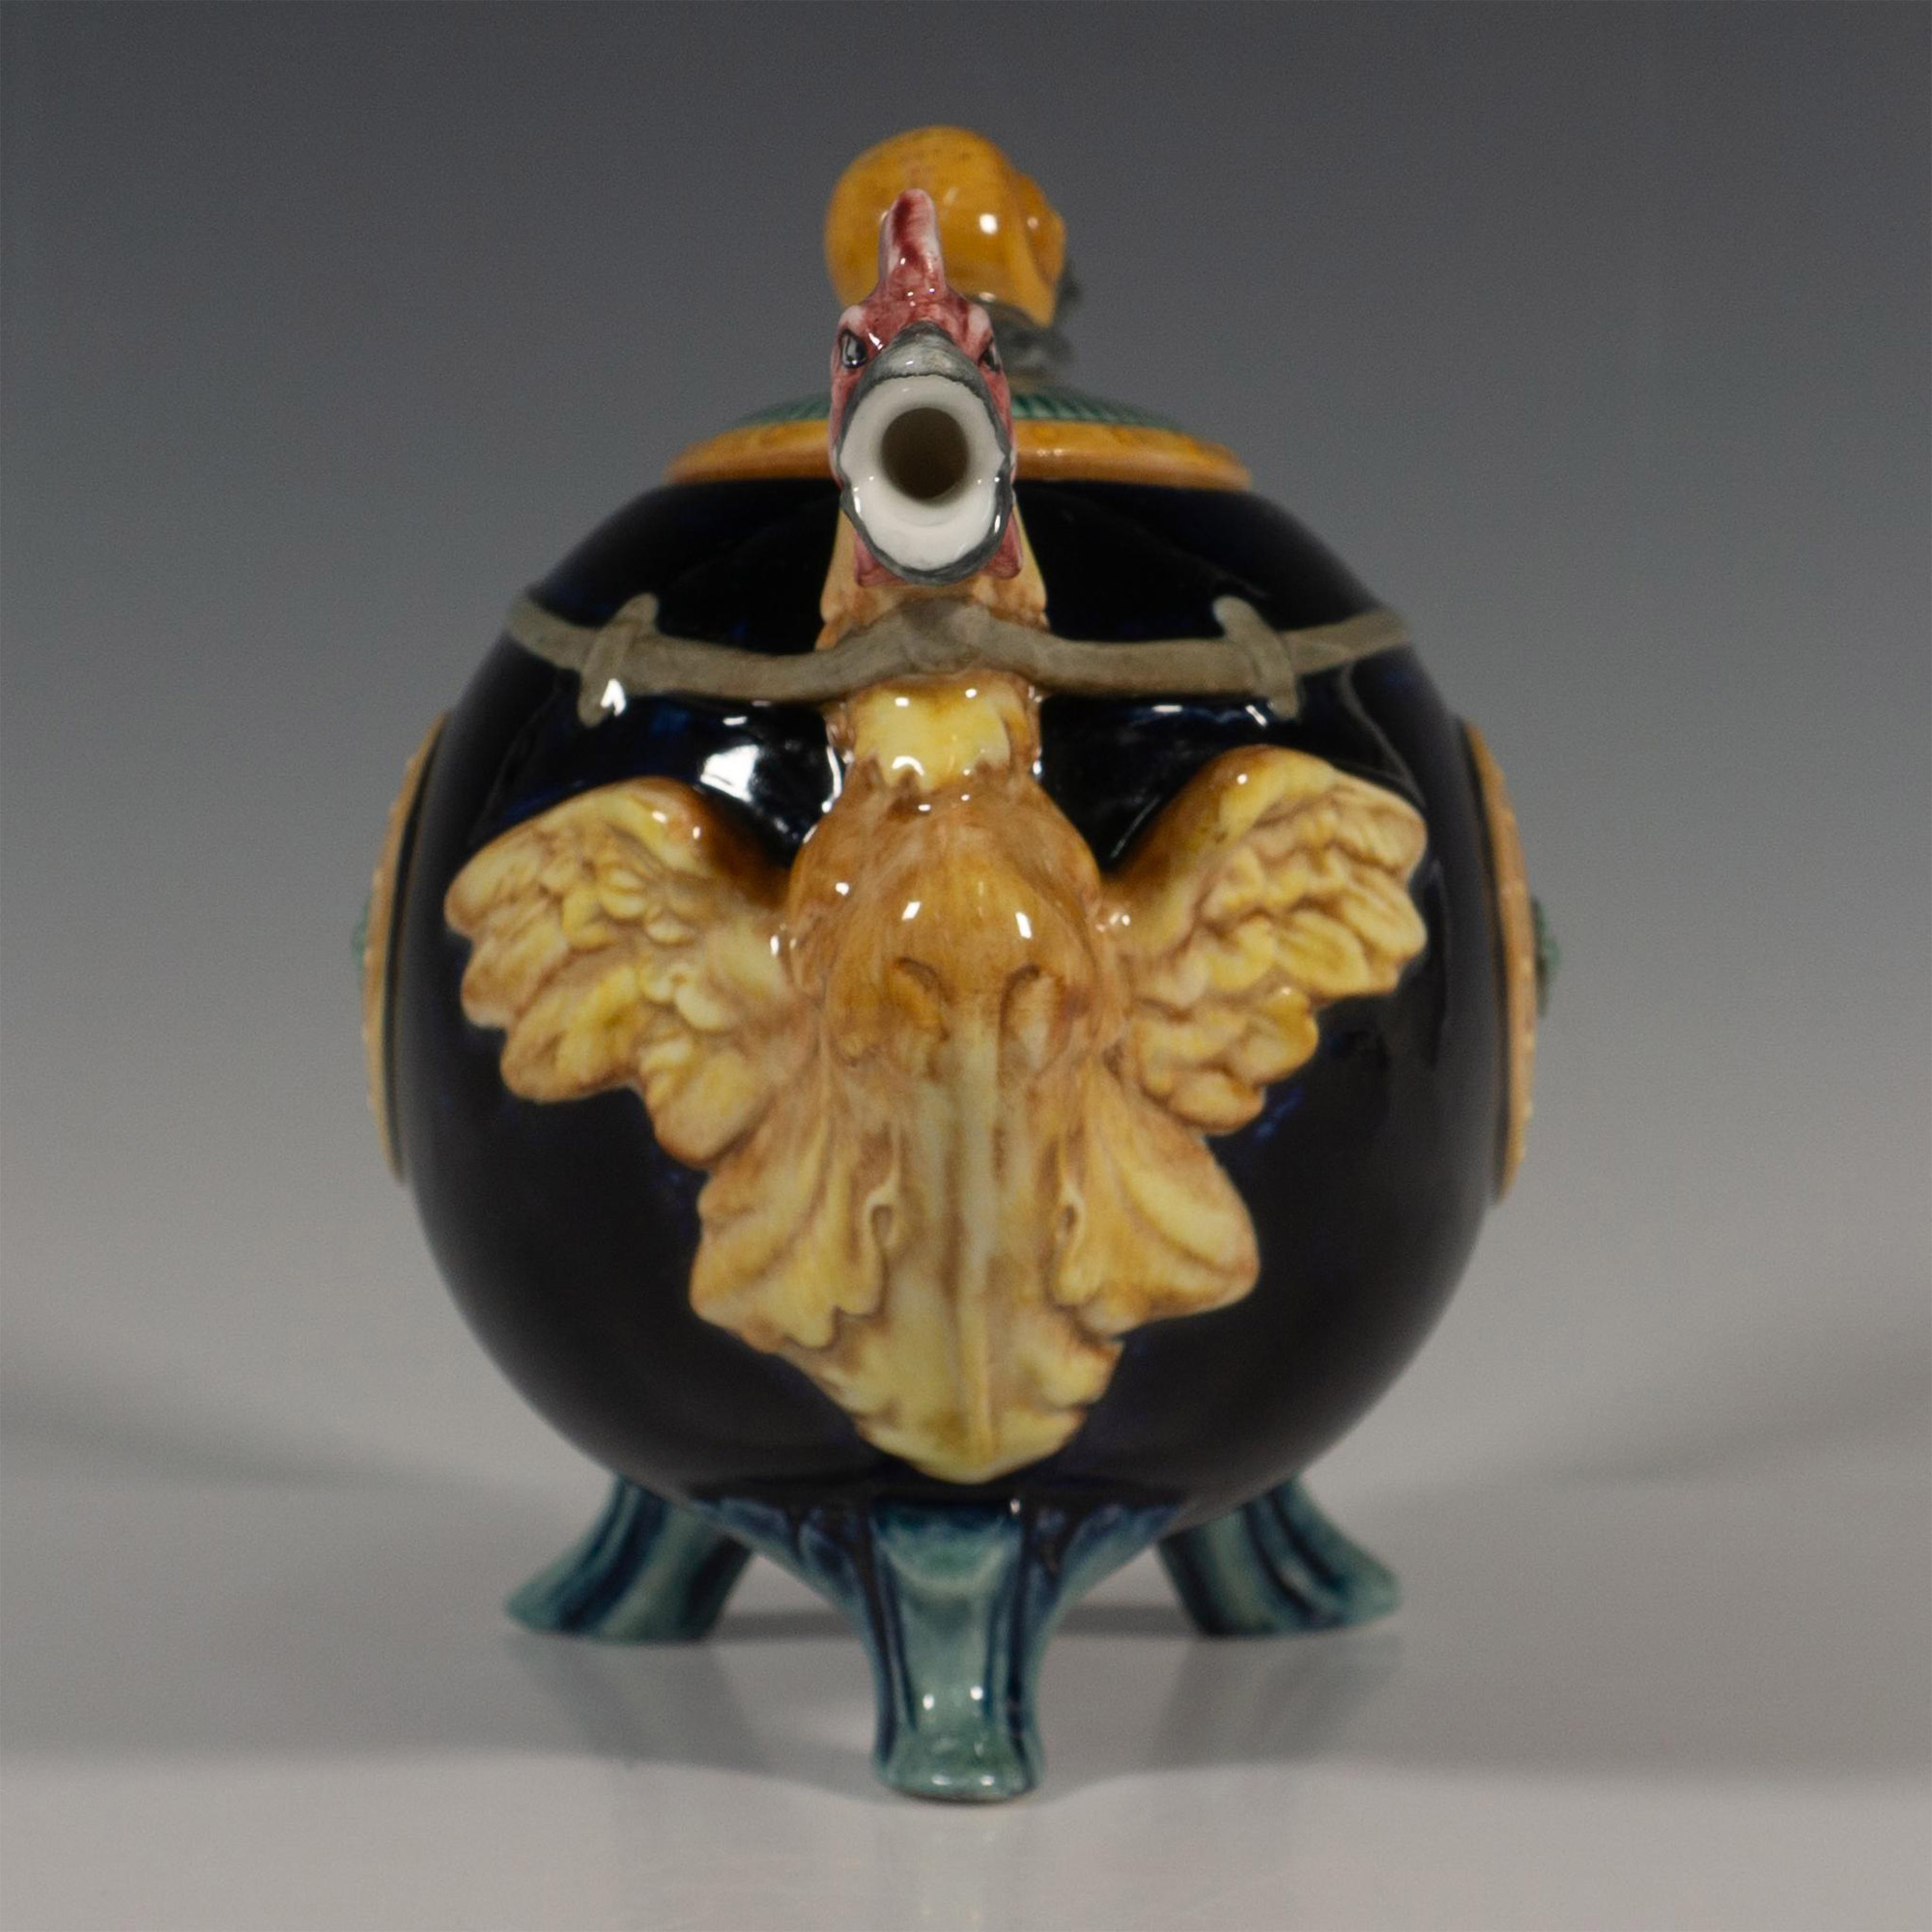 Minton Archive Limited Edition Cockerel and Monkey Teapot - Image 2 of 6